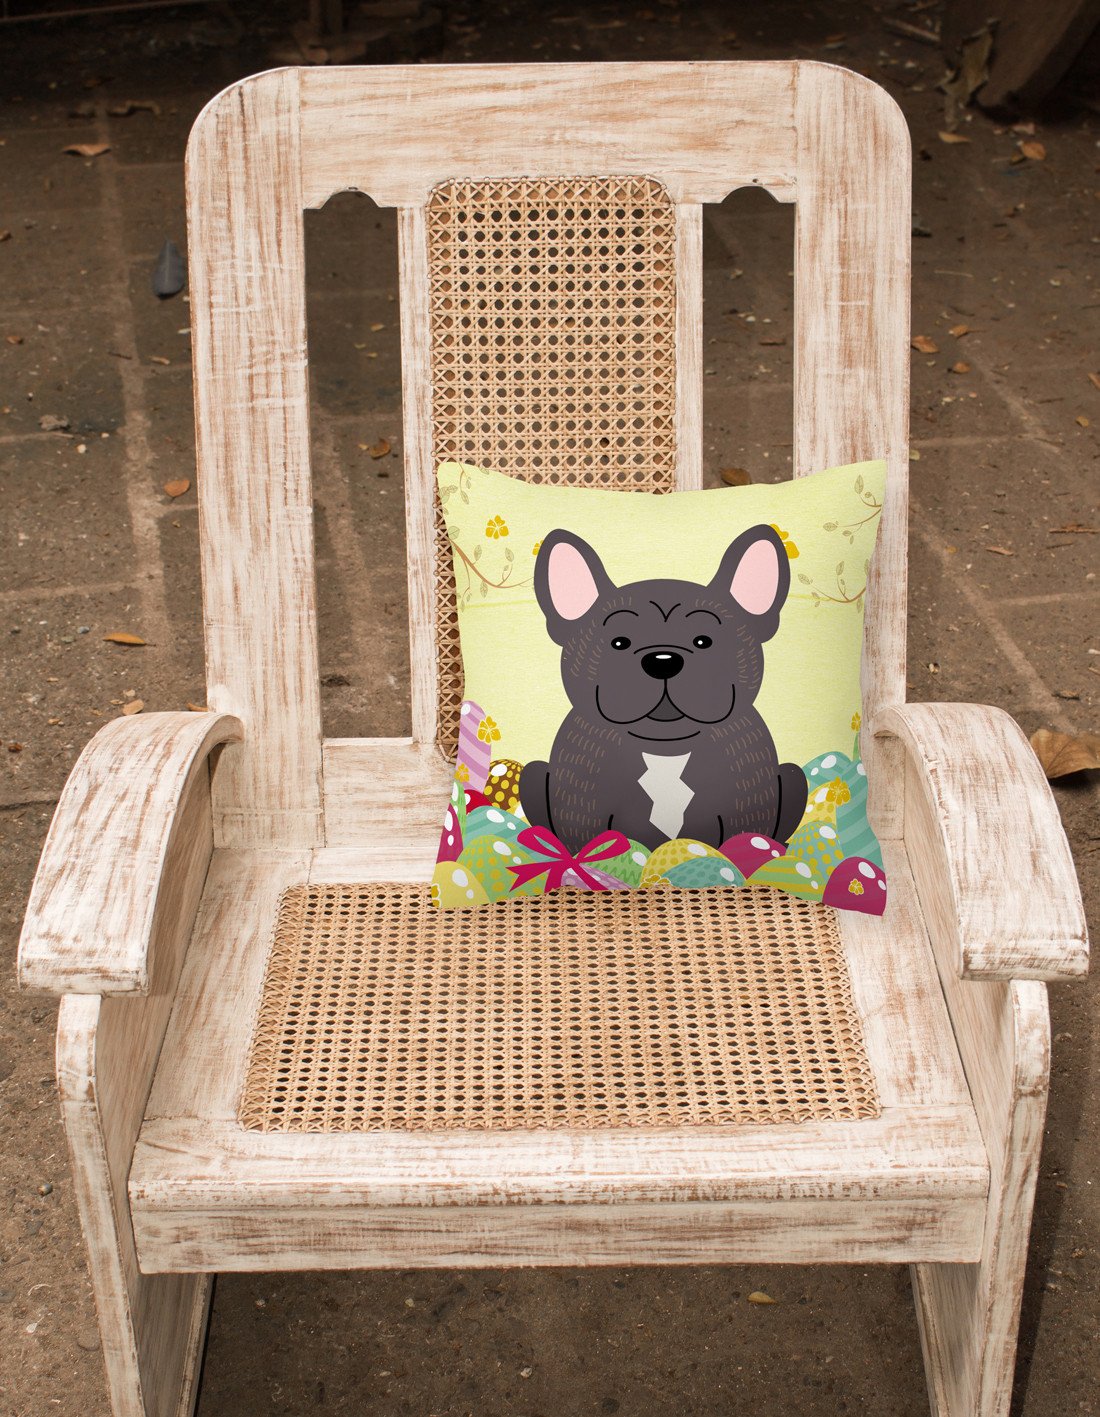 Easter Eggs French Bulldog Brindle Fabric Decorative Pillow BB6009PW1818 by Caroline's Treasures